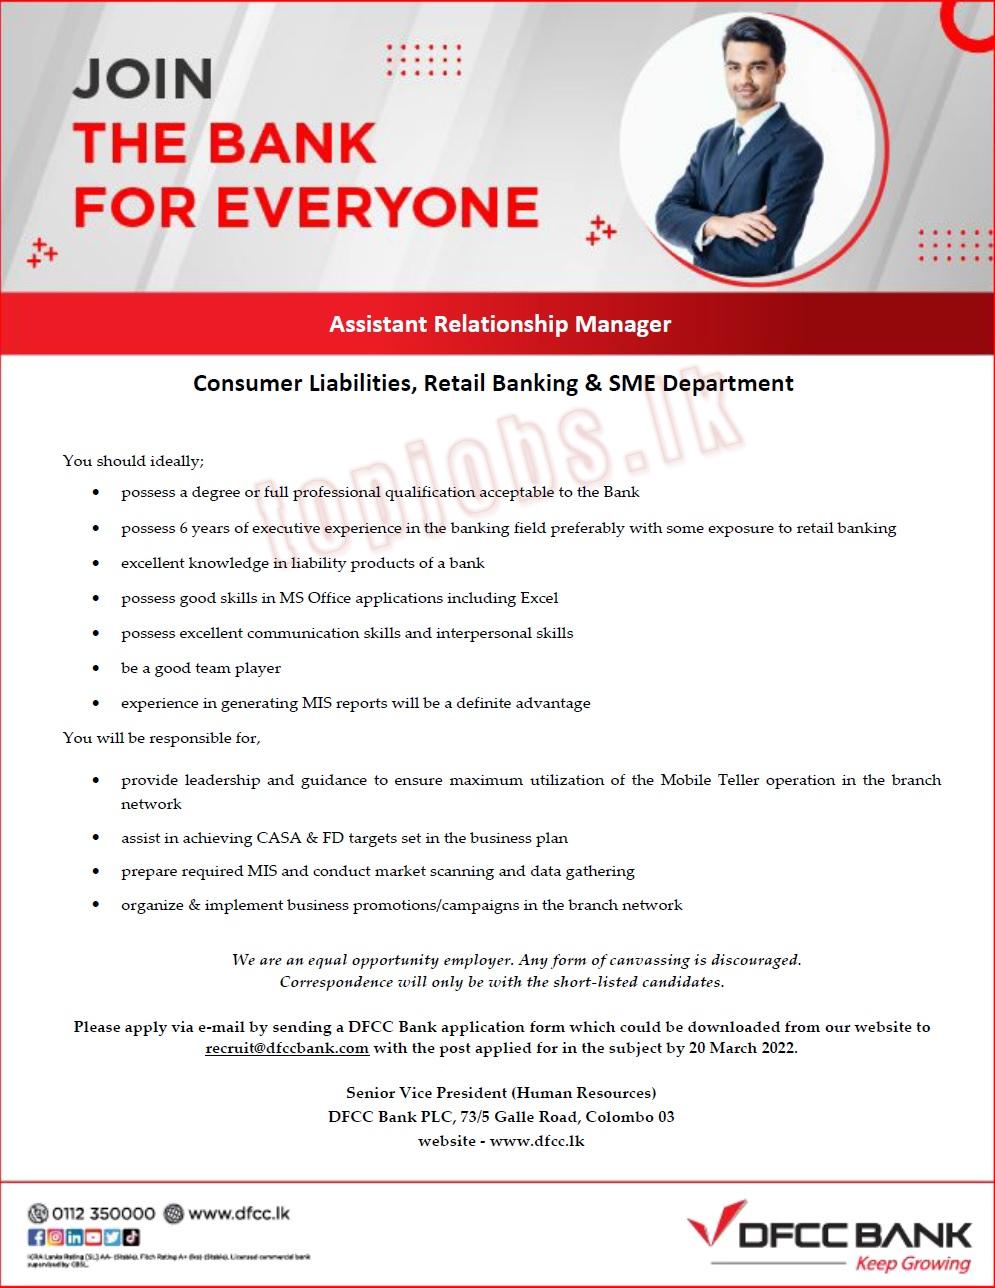 Assistant Relationship Manager of Retail Banking & SME - DFCC Bank